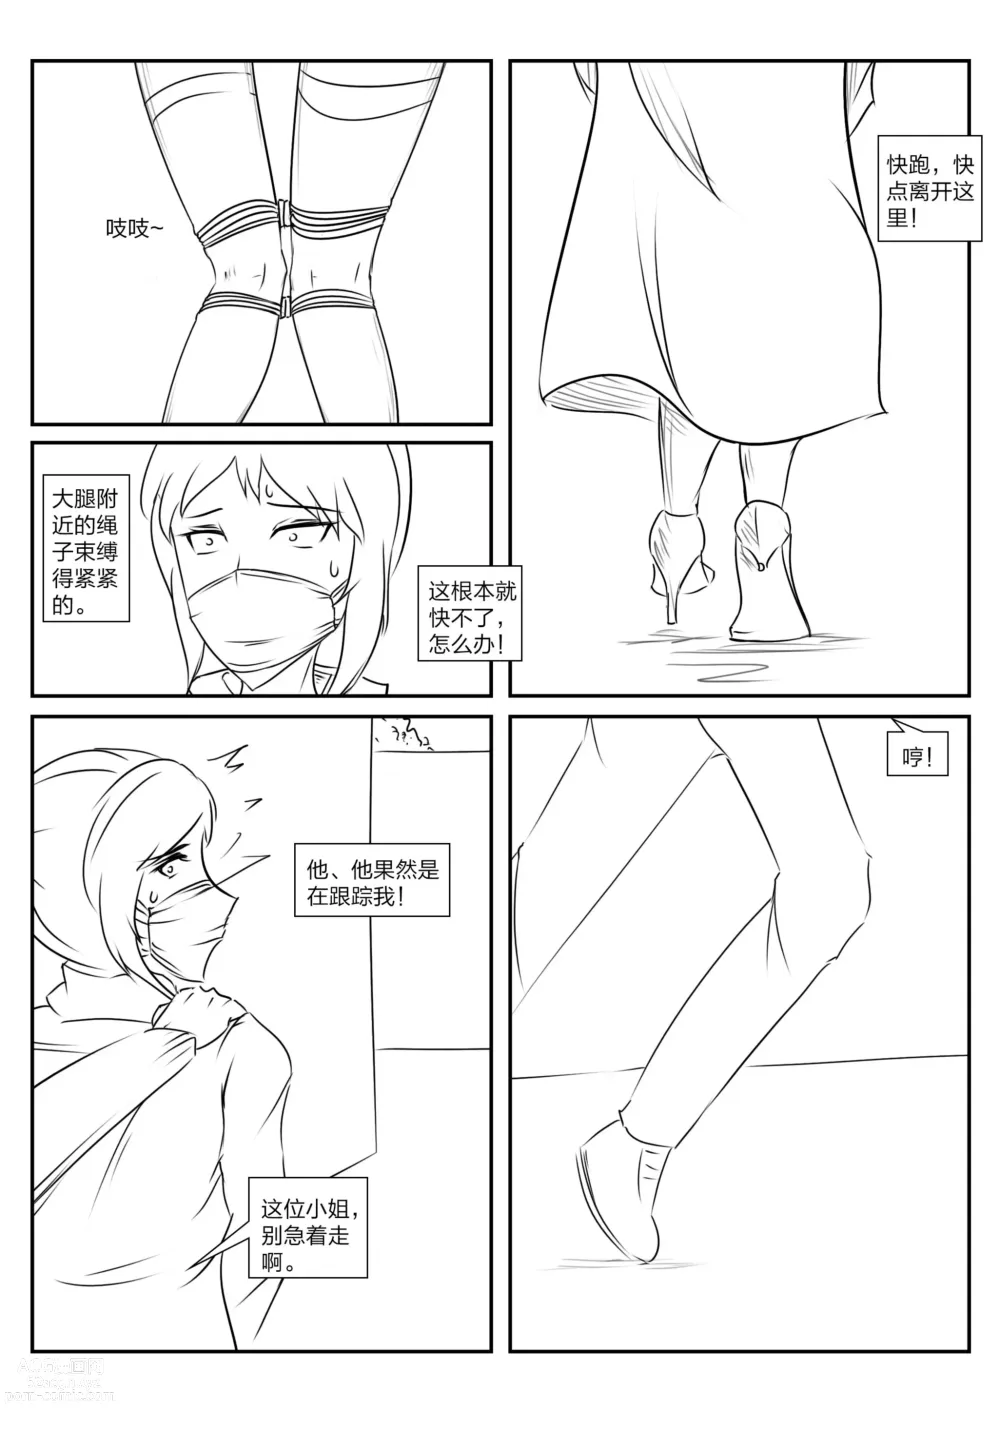 Page 41 of doujinshi The crisis in public self bondage